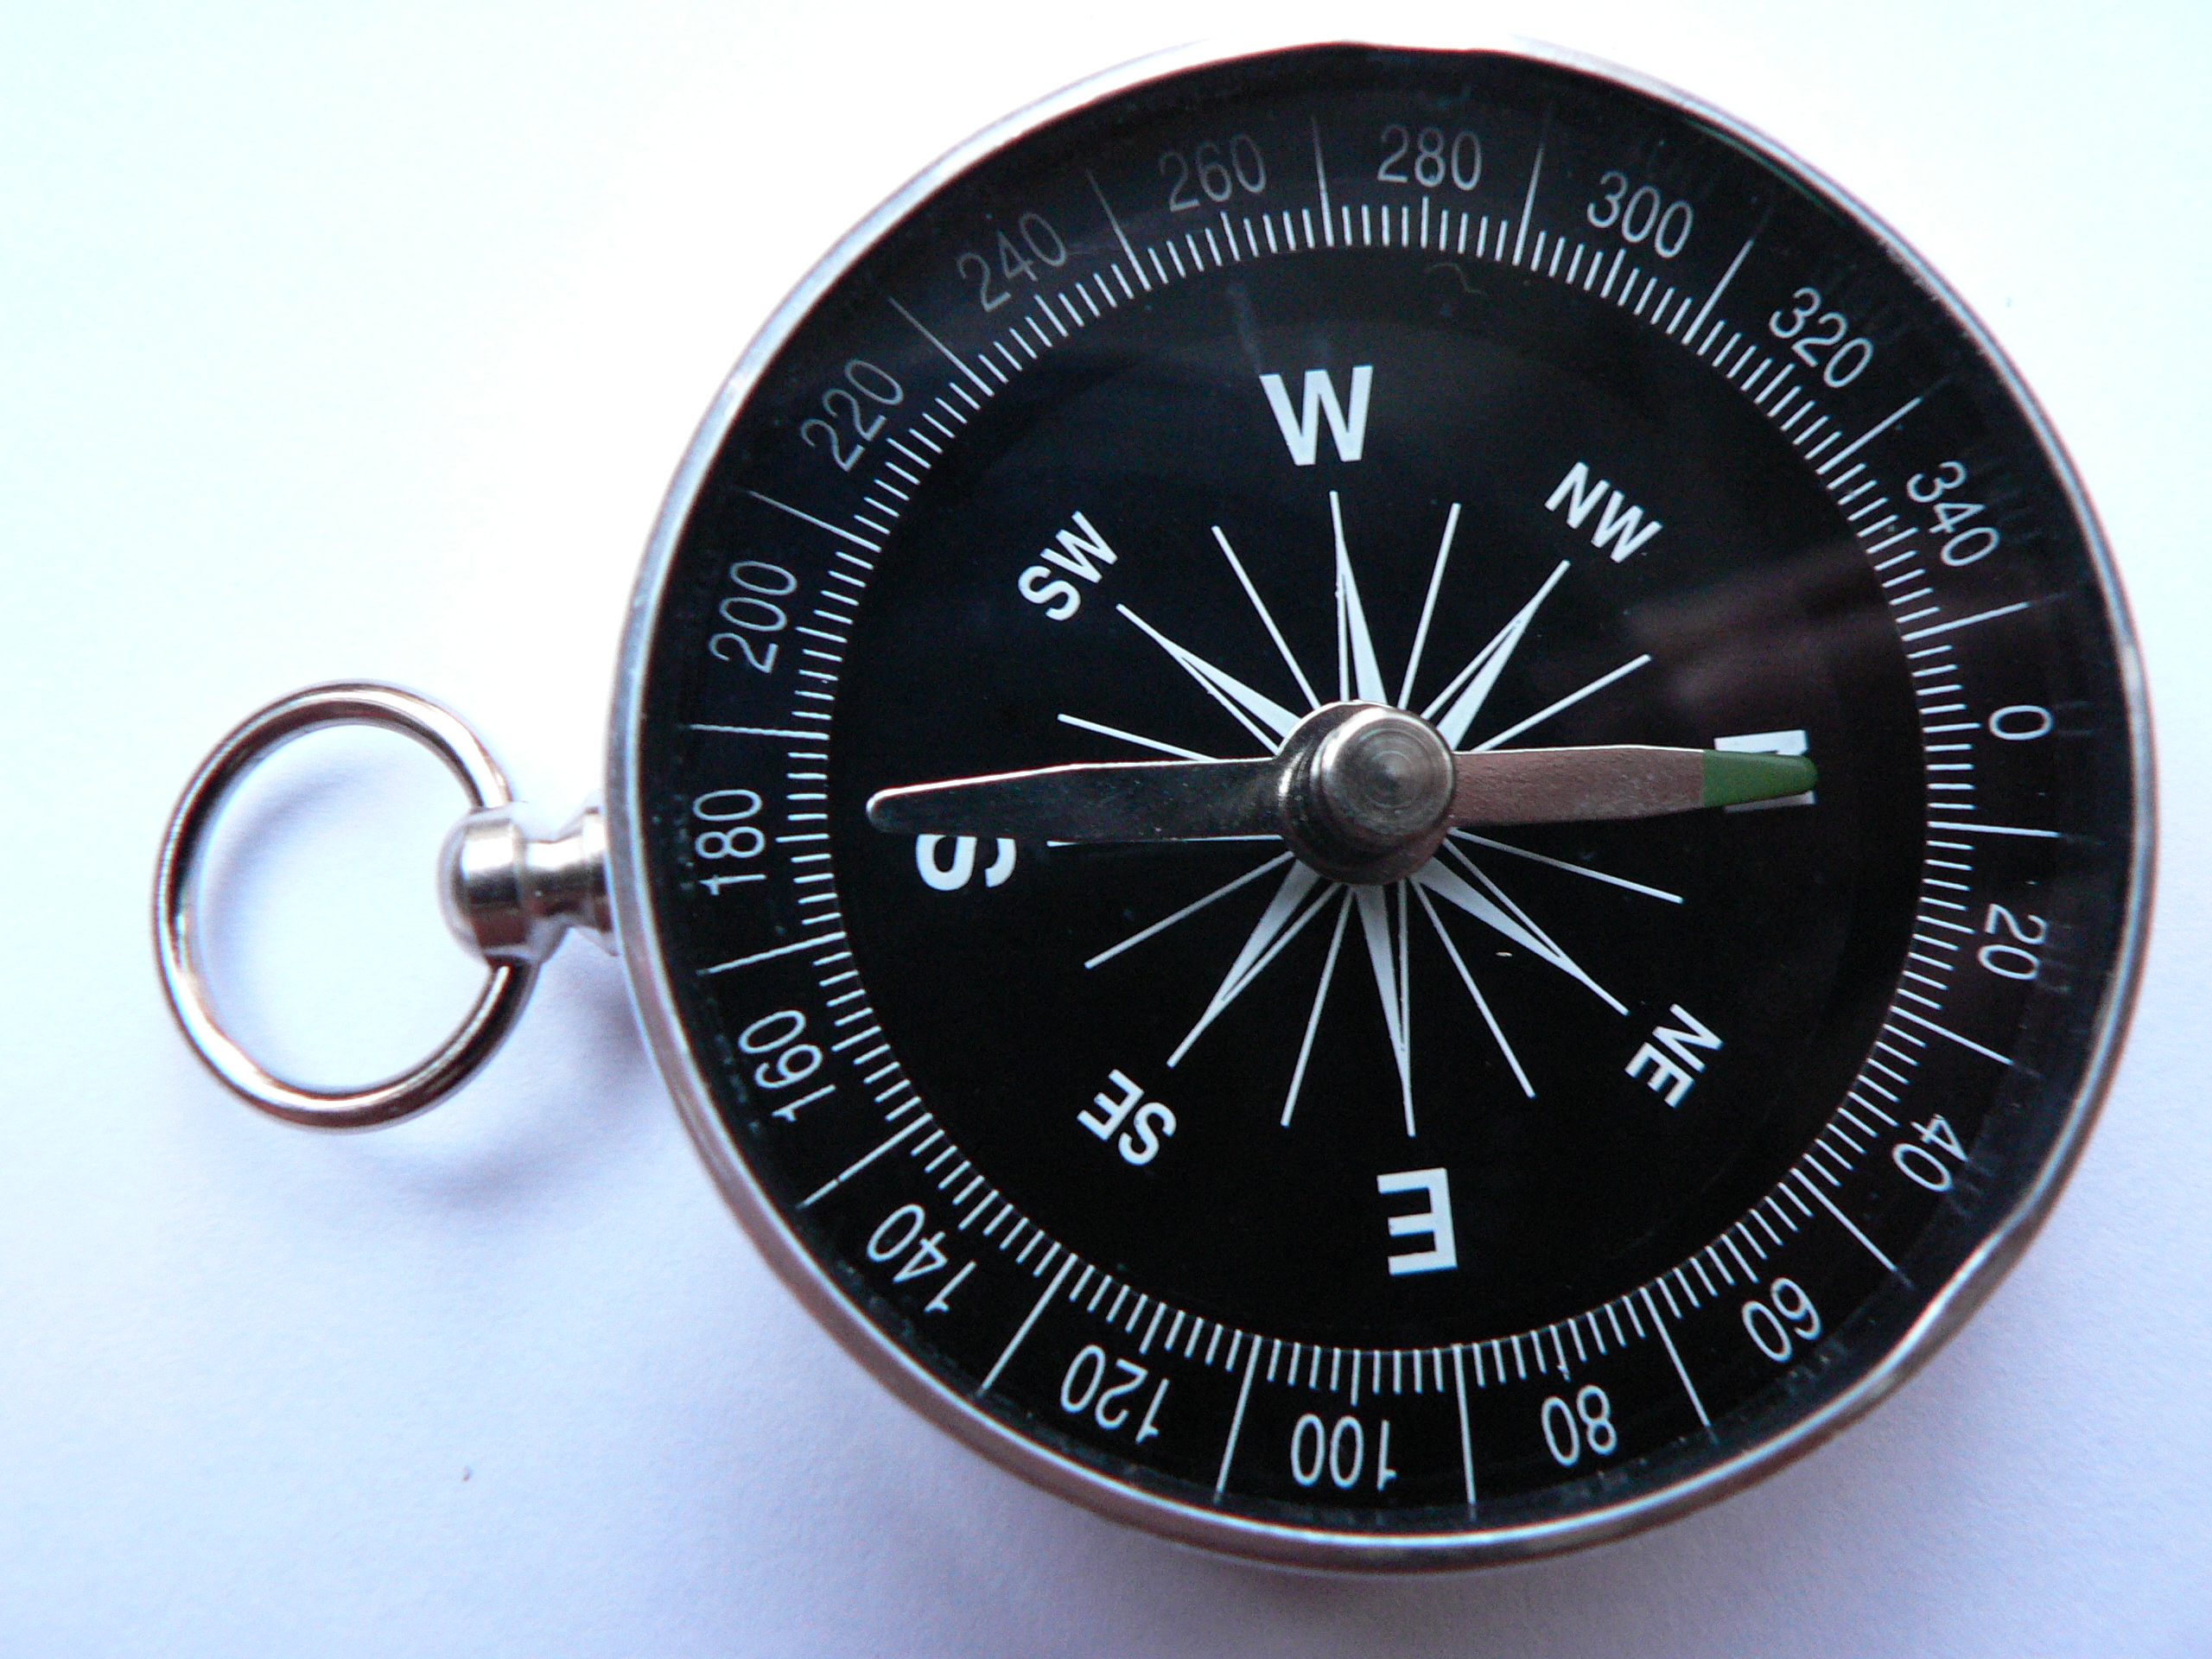 A simple dry magnetic pocket compass